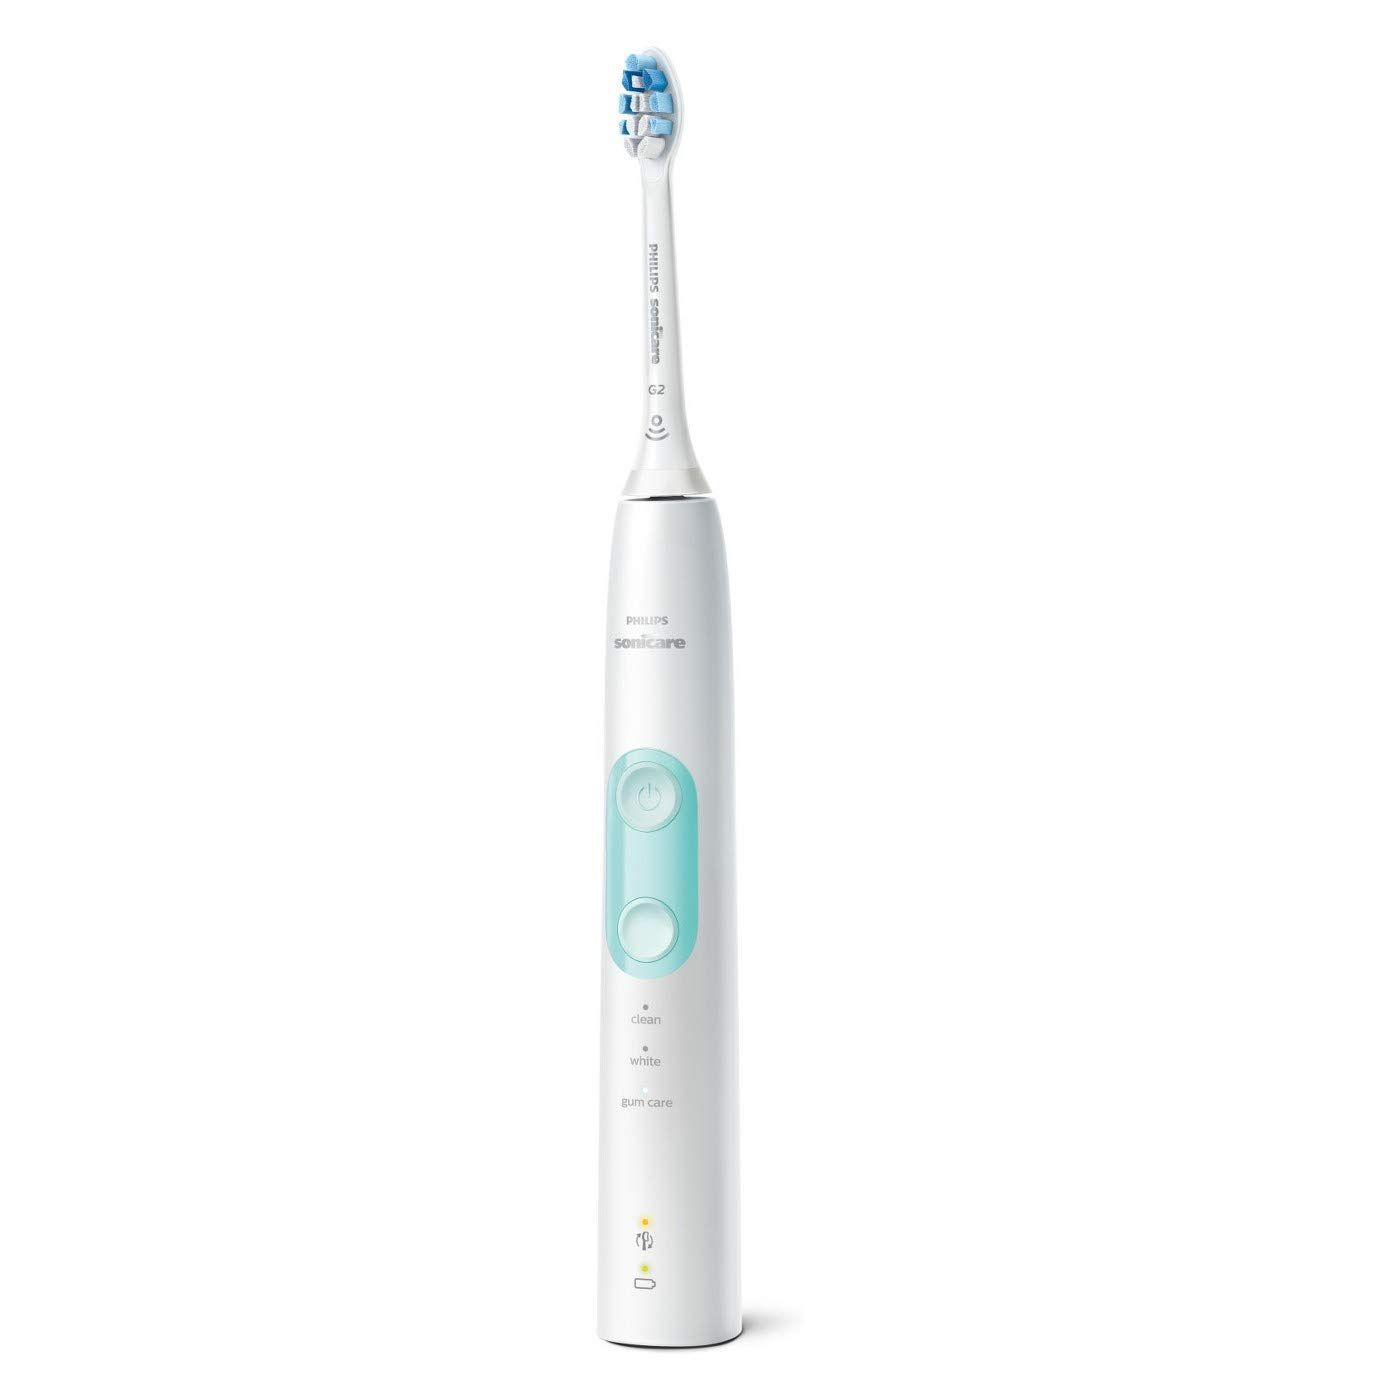 Philips Sonicare ProtectiveClean 5100 Rechargeable Electric Power Toothbrush, White, HX6857/11 | Amazon (US)